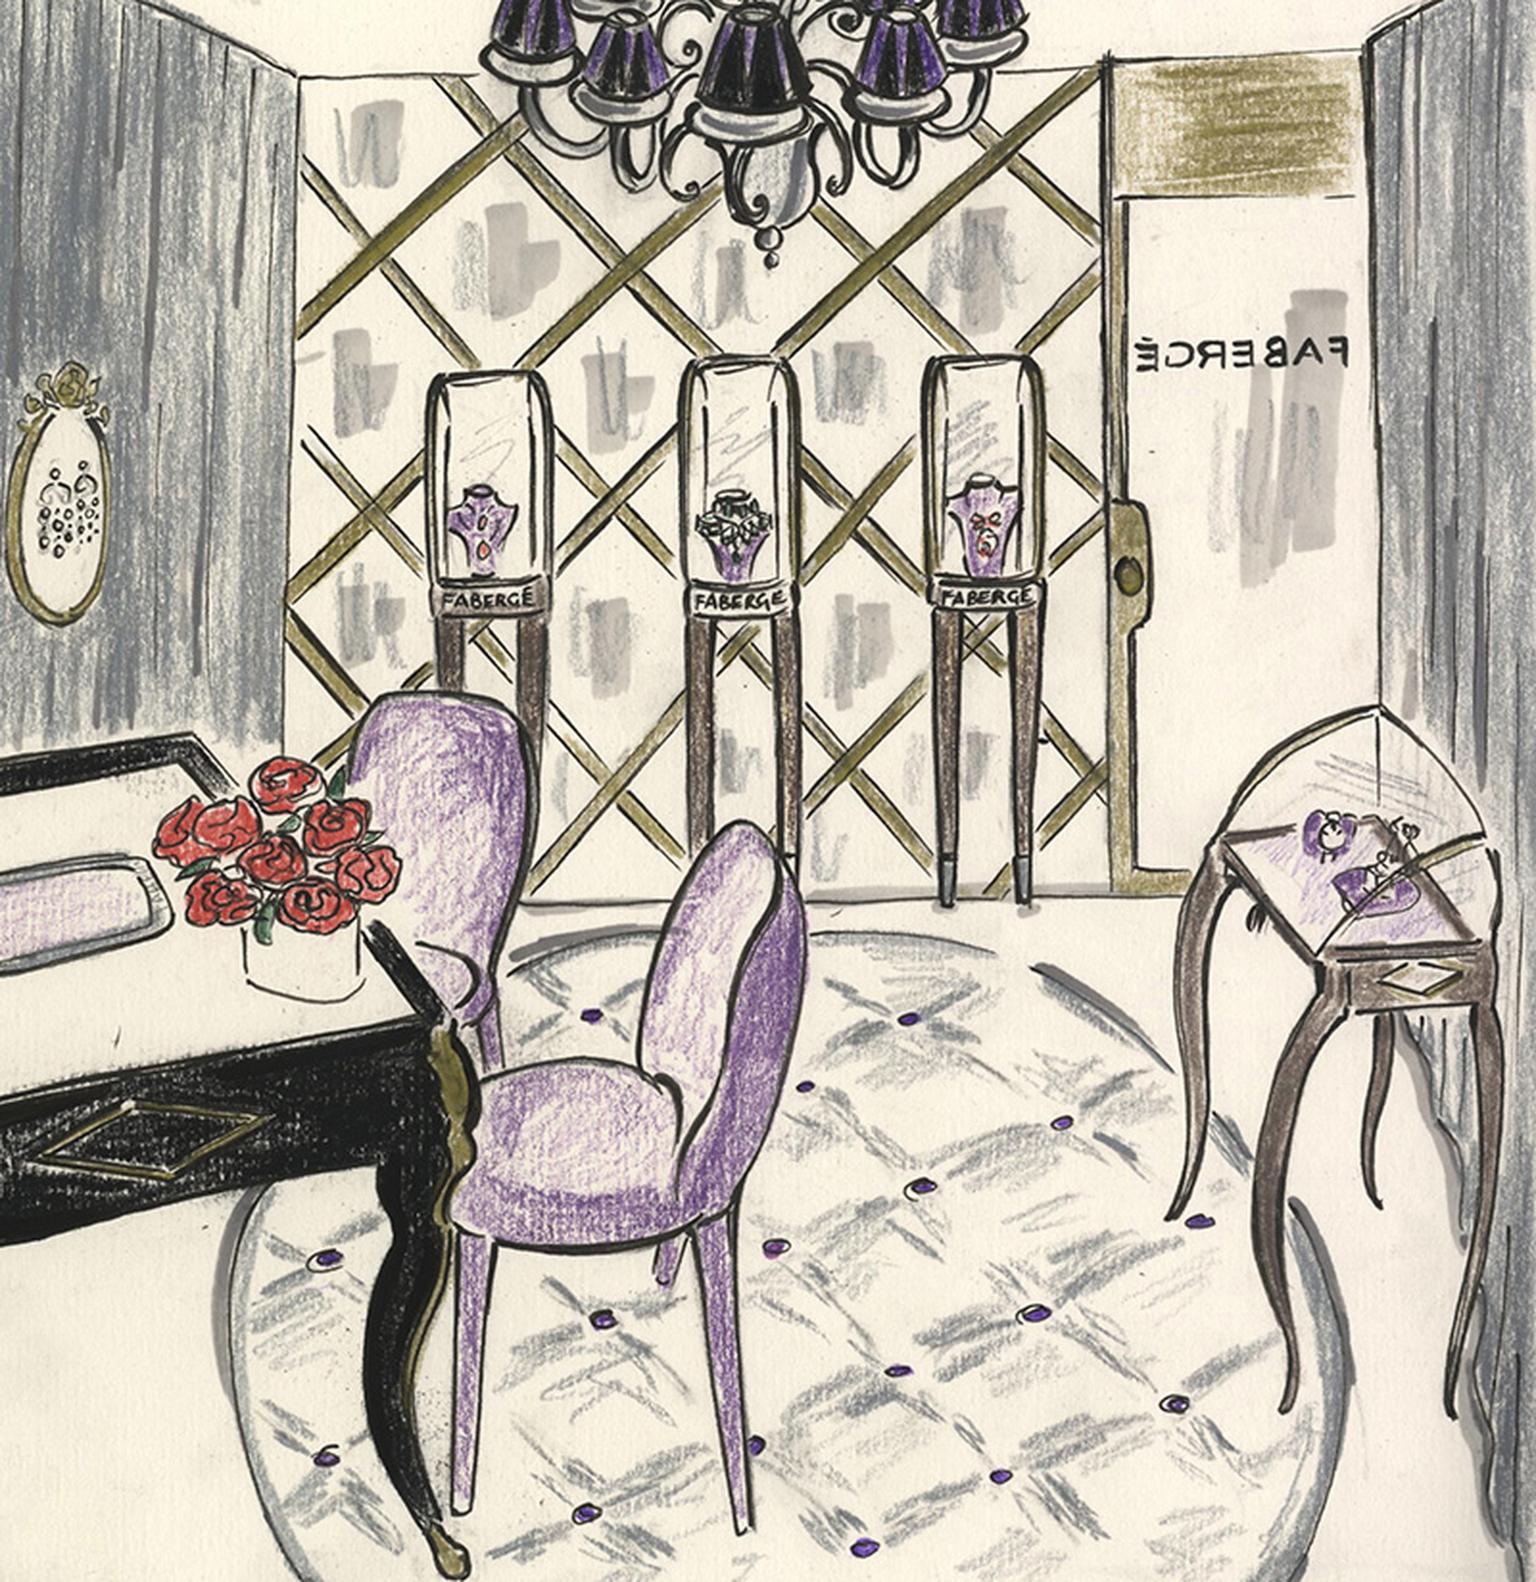 Faberge-New-York-Madison-Avenue-Boutique-Sketch